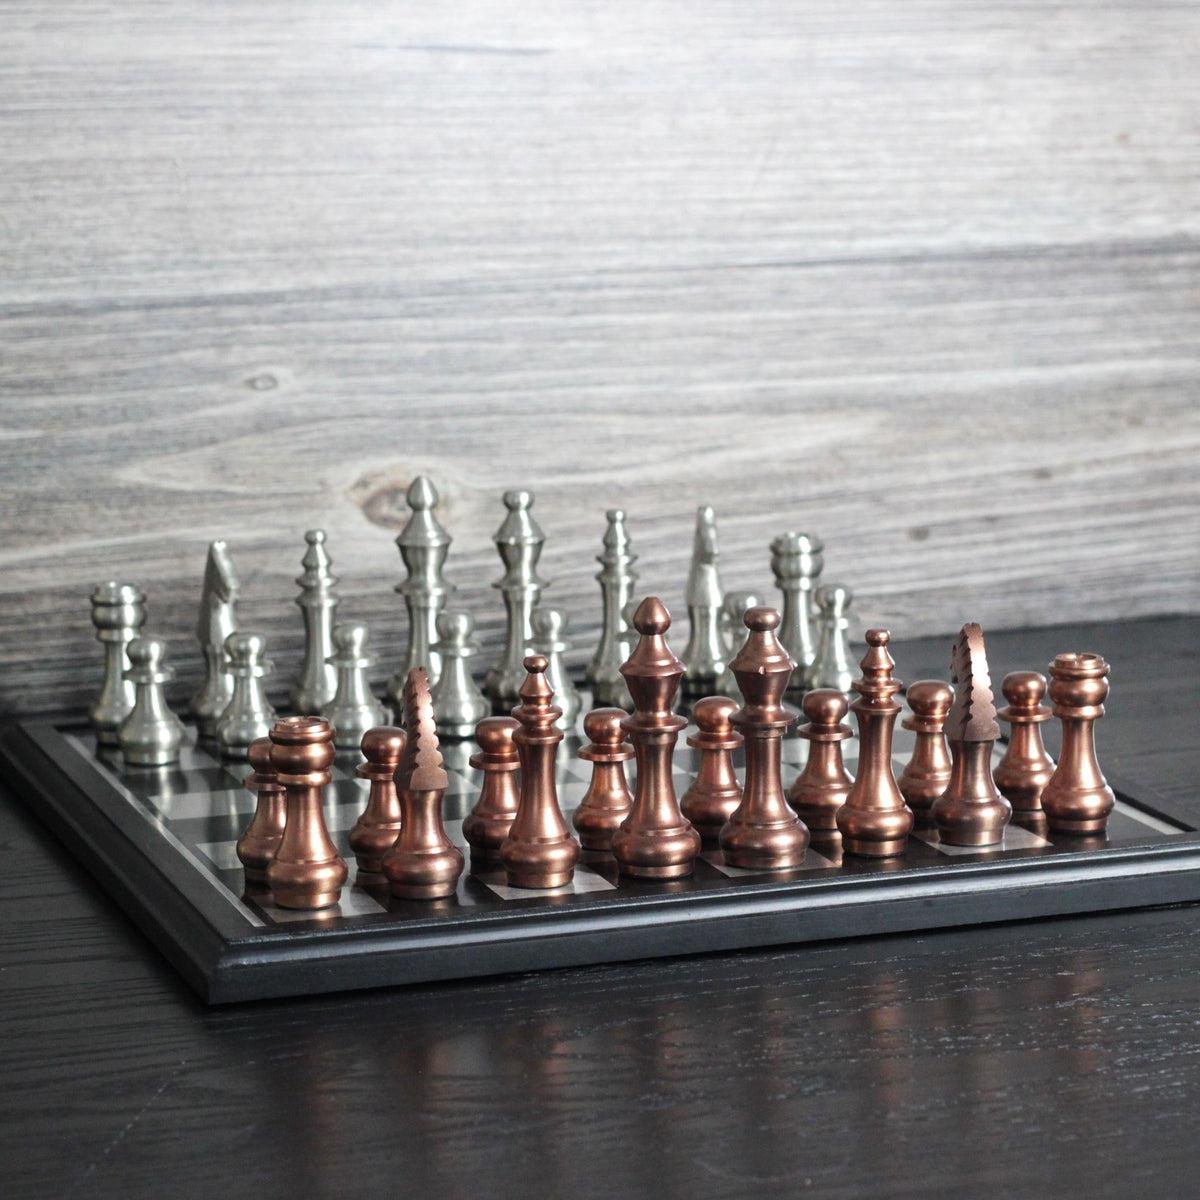 The Sicilian Storm - Rustic Metallic Chess Board and Pieces - Marble Cultures